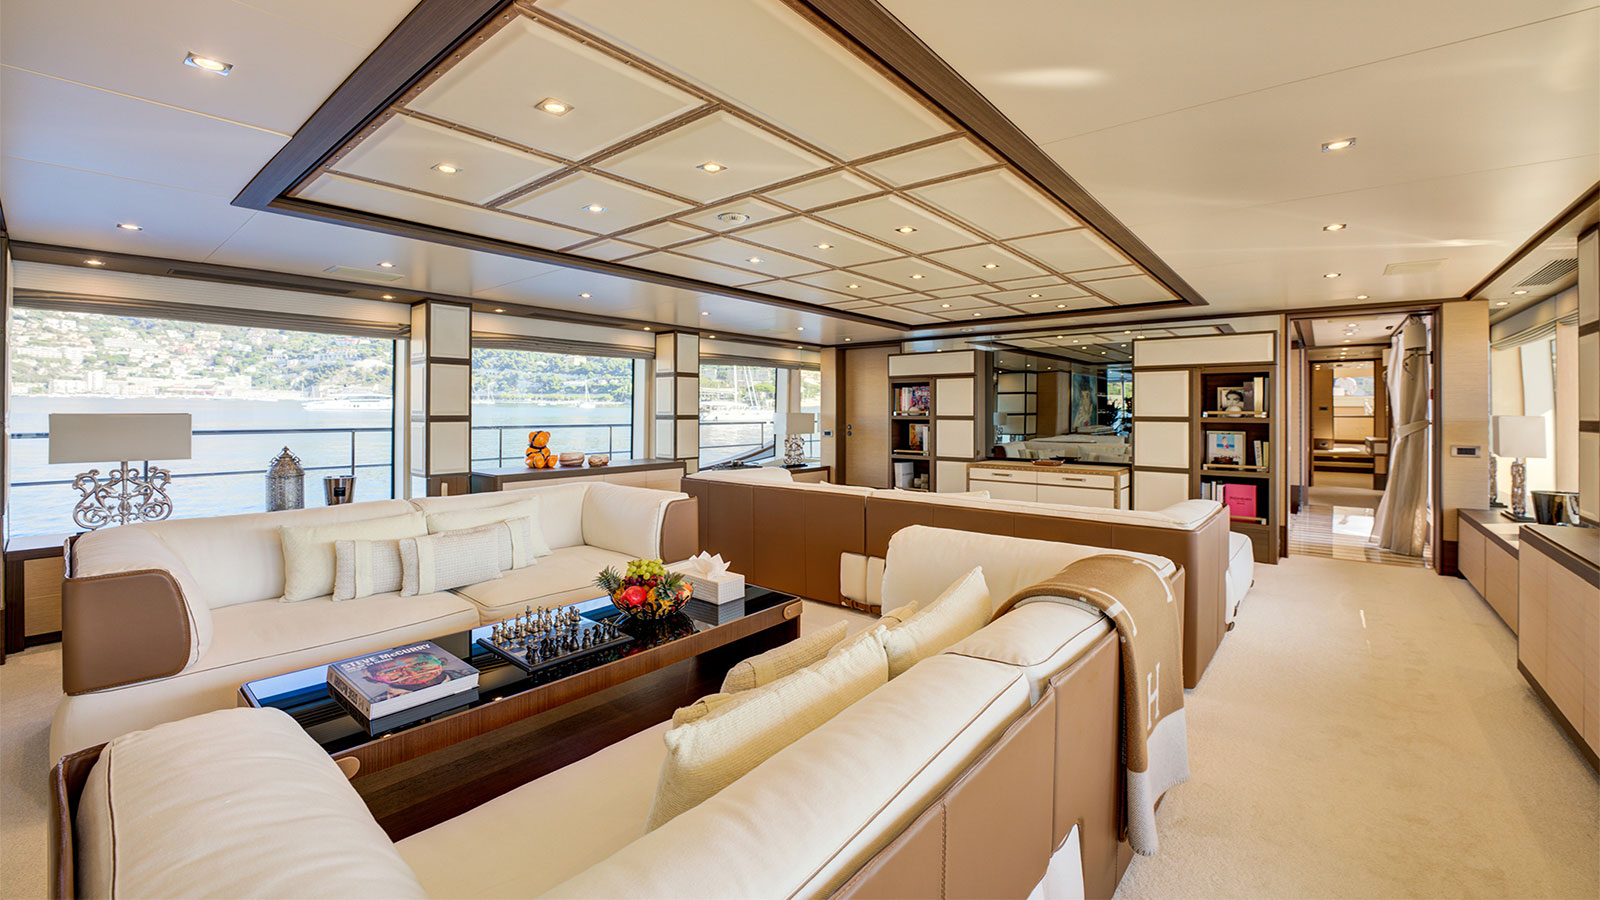 Used Benetti Crystal 140 Yacht For Sale, Motor yacht Benetti Crystal 140, Benetti Crystal 140, Benetti, Benetti Crystal 140 for sale, Benetti yachts, Benetti for sale, Benetti Crystal 140 yachts, buy Benetti Crystal 140, 2014 Benetti Crystal 140, Benetti turkey, Benetti yacht sales, Benetti motoryacht, perfomax, perfomax marine, ete yachting for sale, Benetti Crystal 140 megayacht, Benetti Crystal 140 superyacht, yacht brokerage, yacht sales, turkey broker, turkey brokerage, preowned Benetti, secondhand Benetti